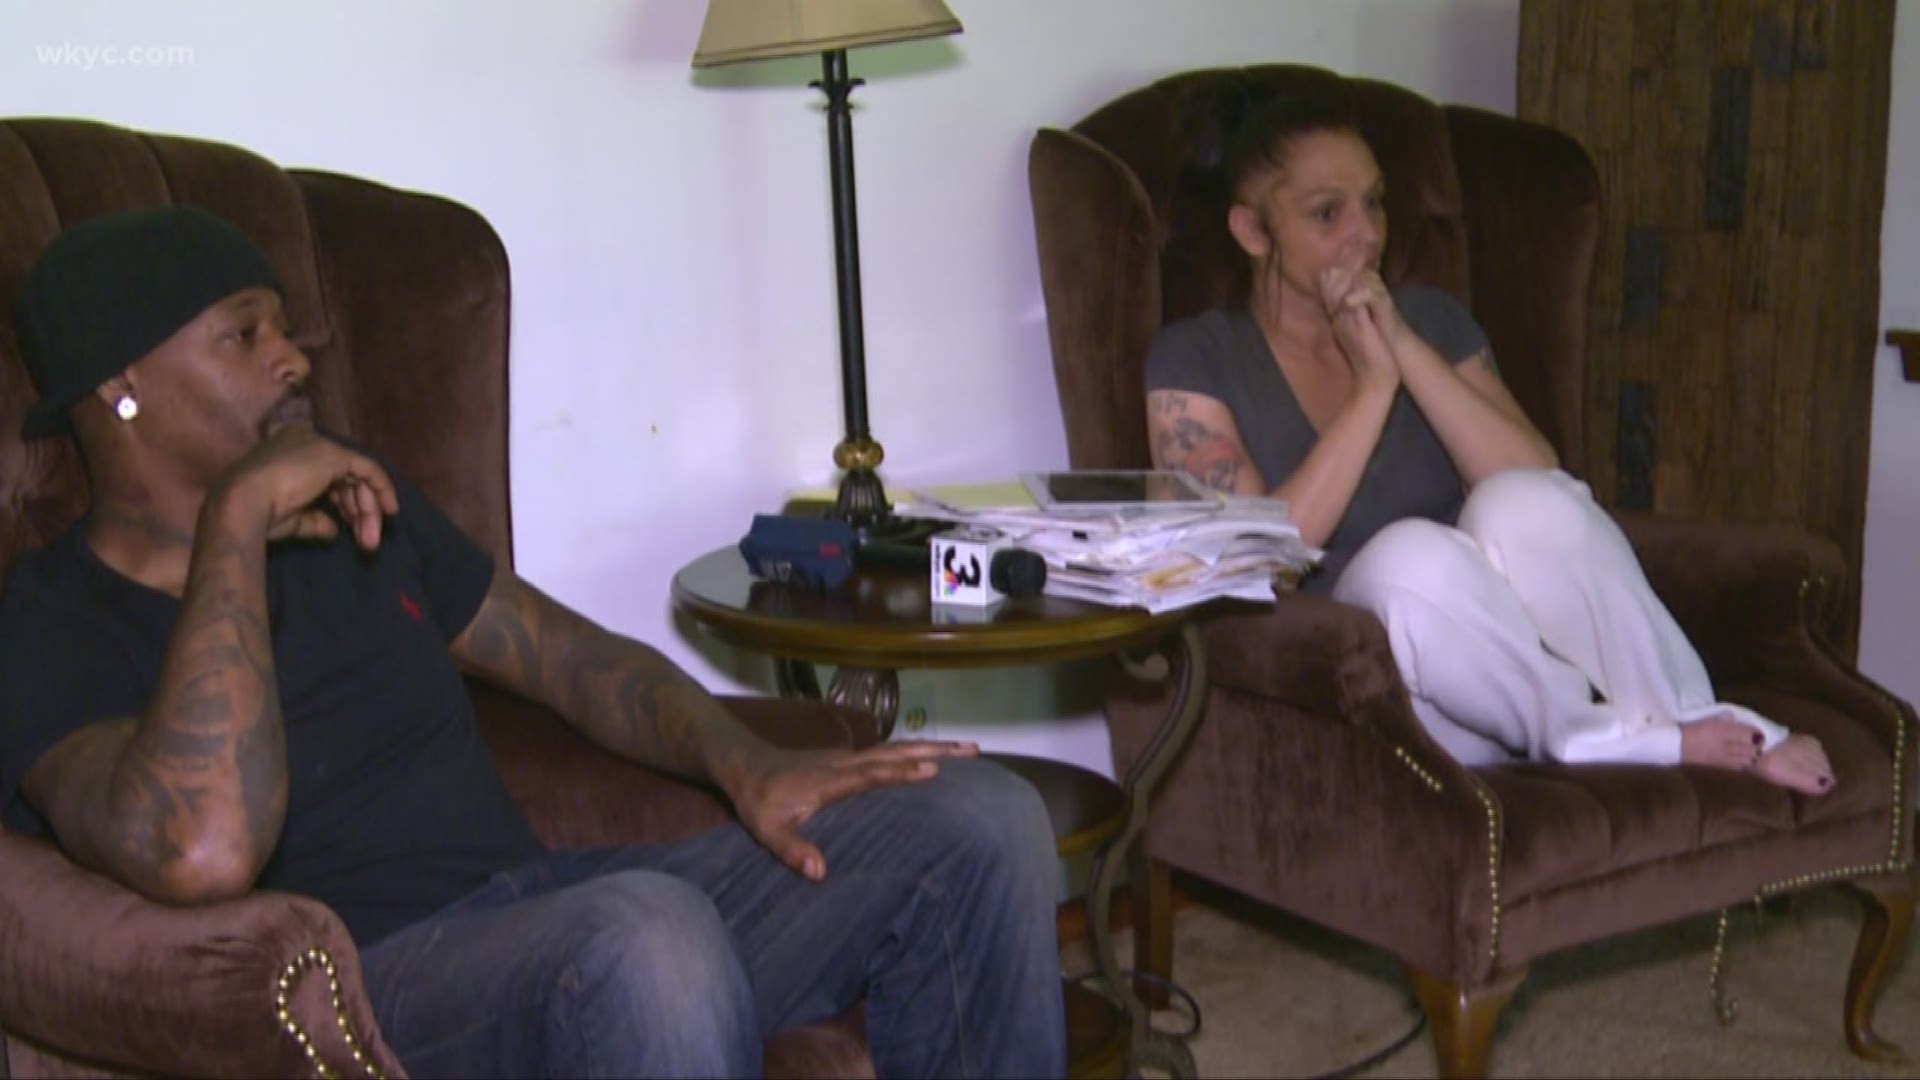 Middleburg Heights family say they are victims of hate crimes, some are skeptical